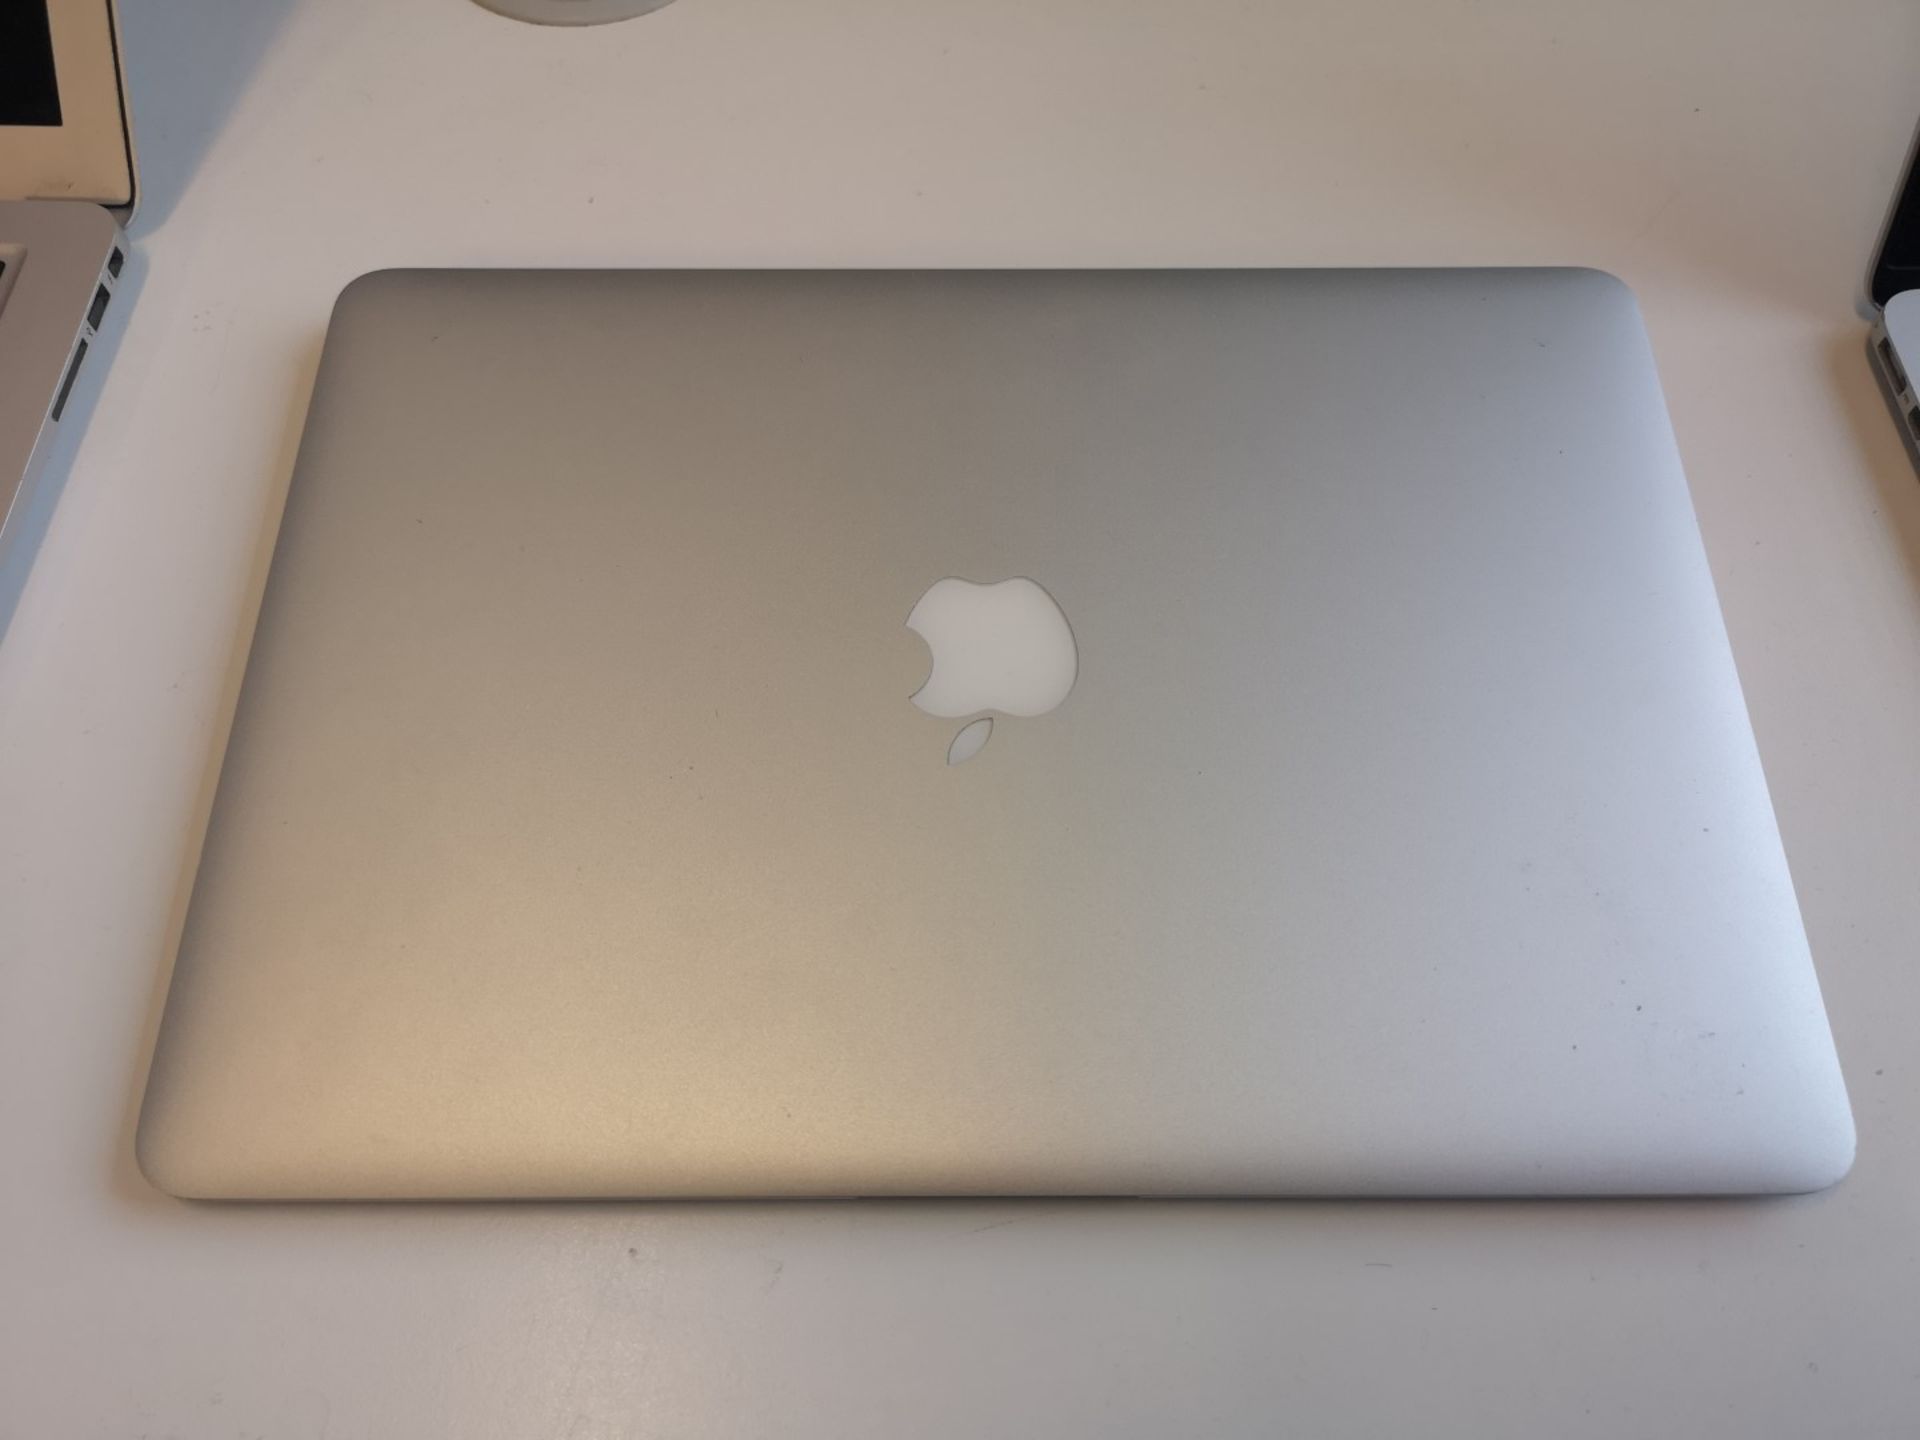 Apple MacBook Air "Core i5" 1.4 13" (Early 2014) - Image 2 of 3